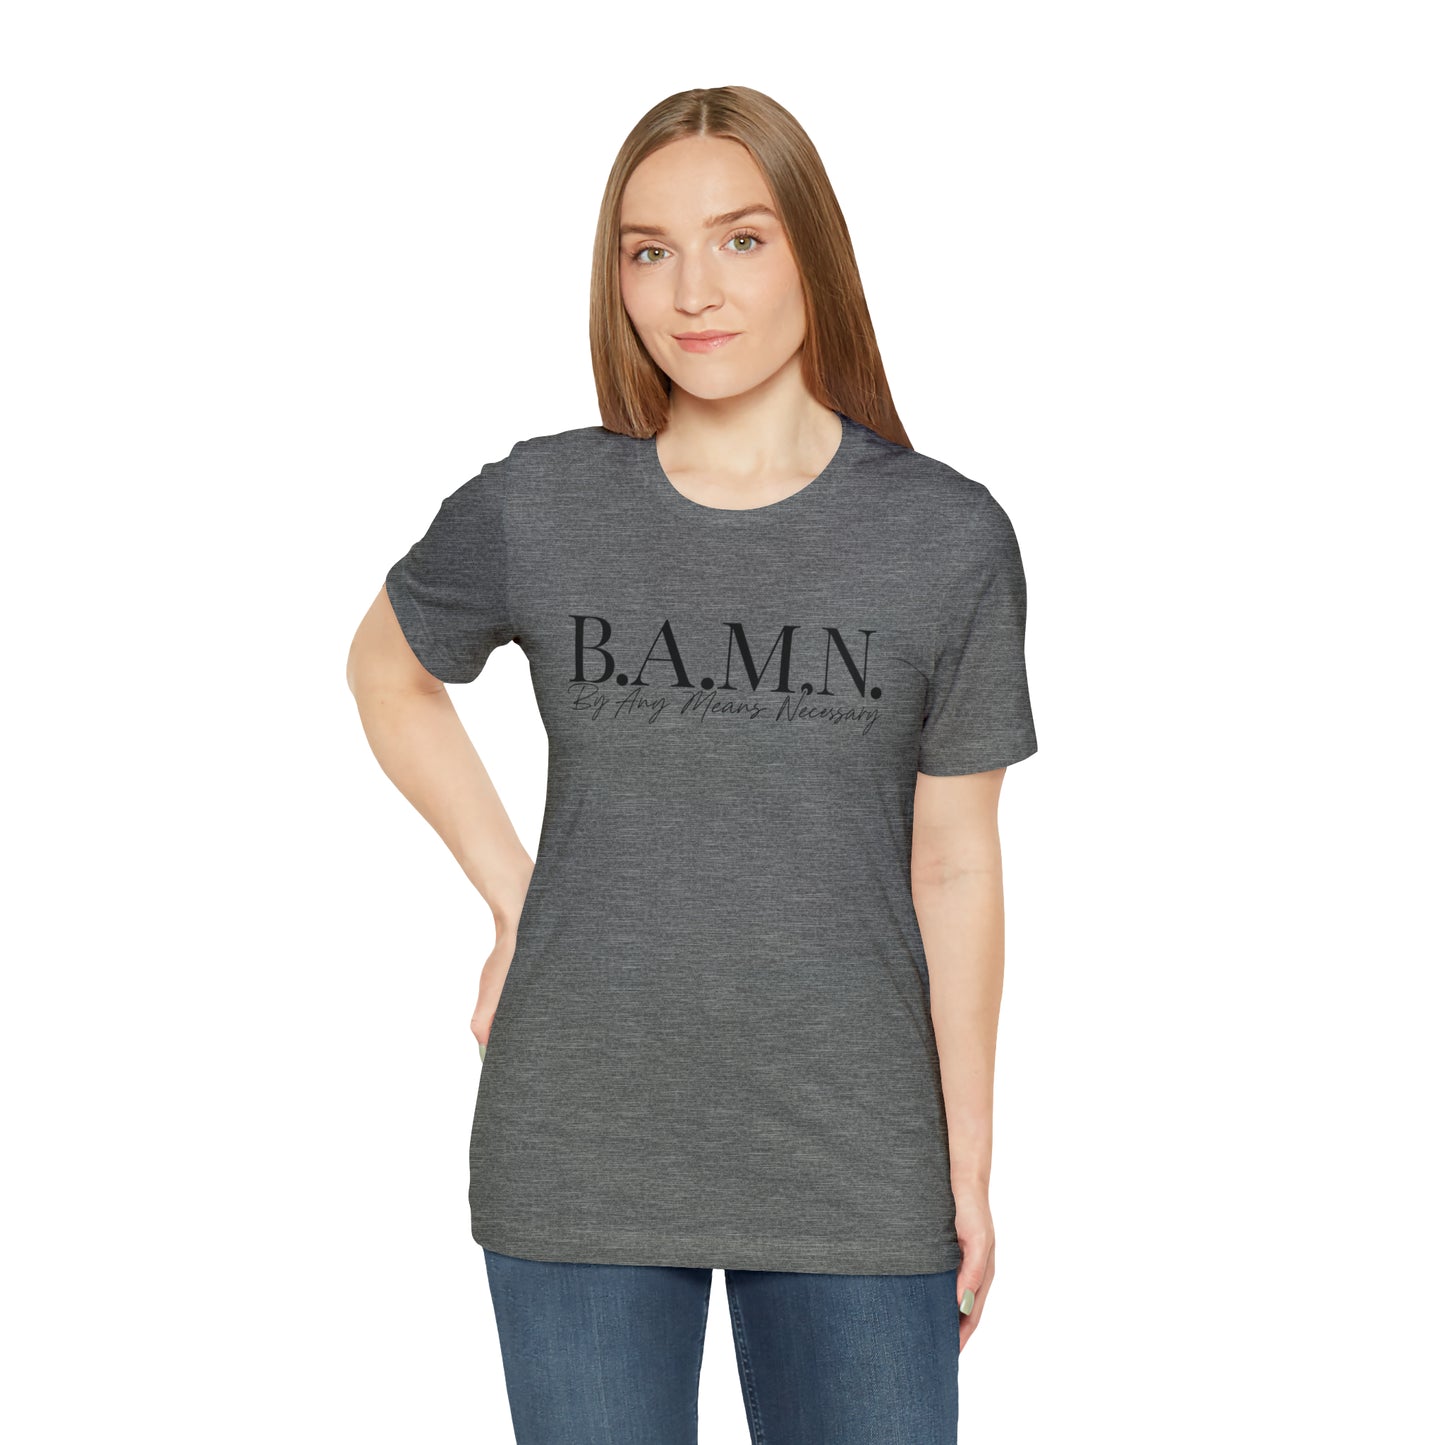 B.A.M.N. By Any Means Necessary Tee